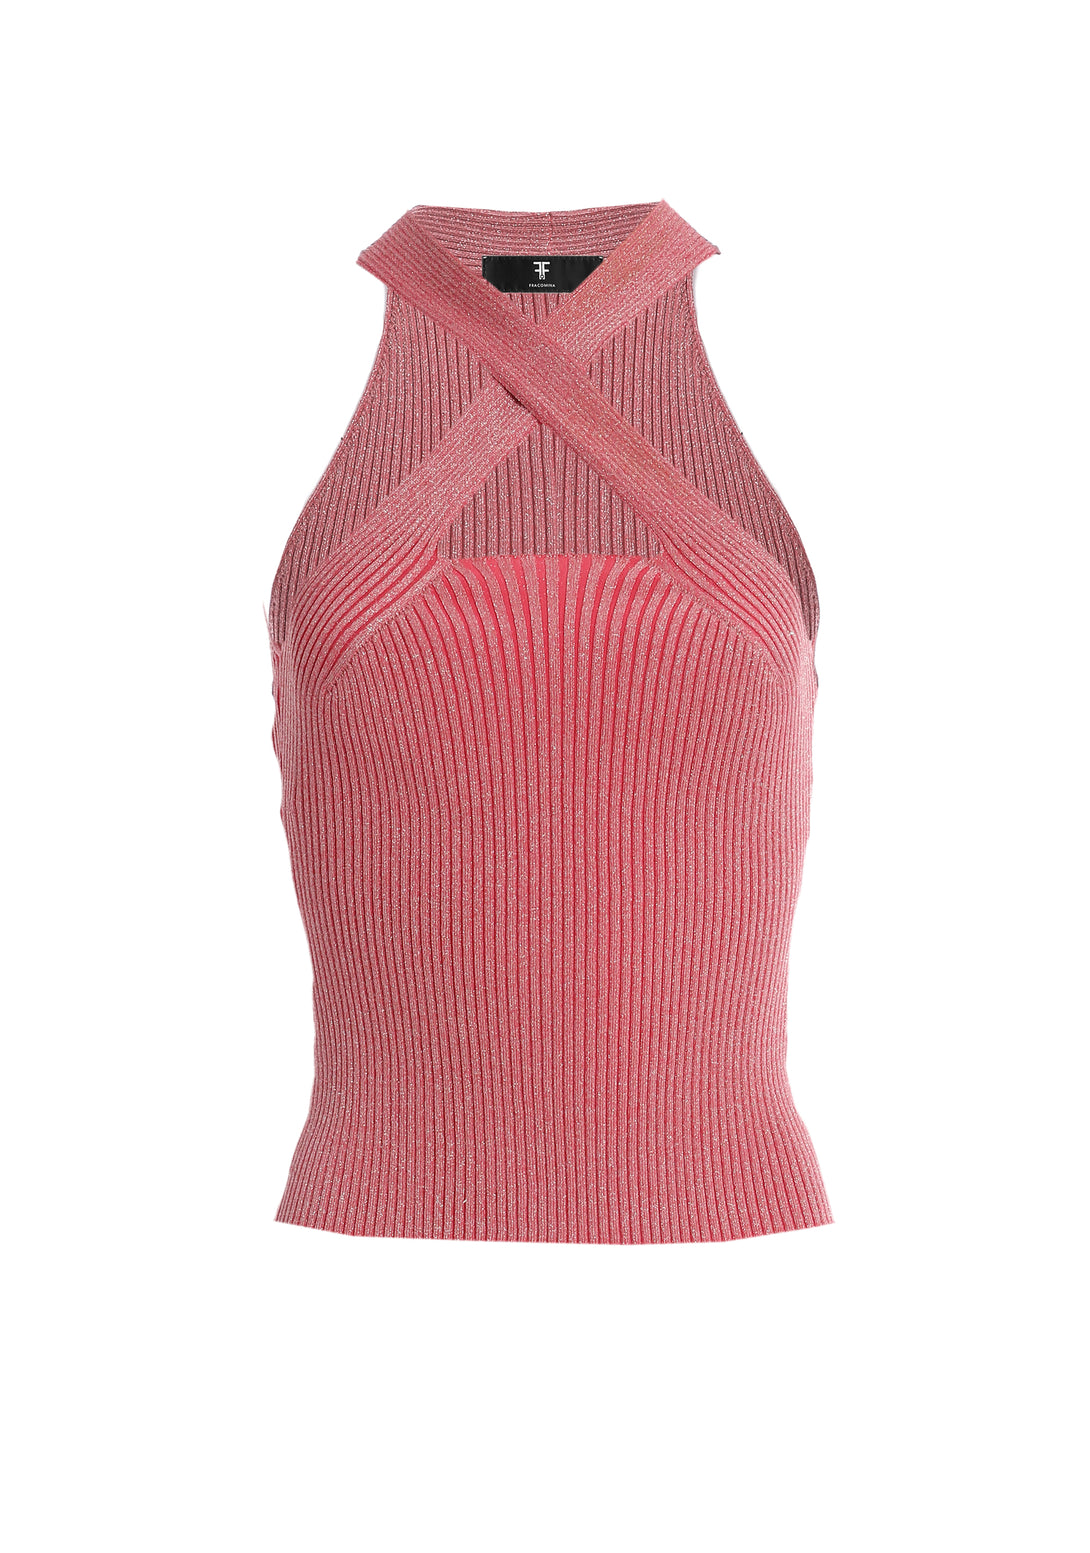 Knitted tank top with ribs and lurex